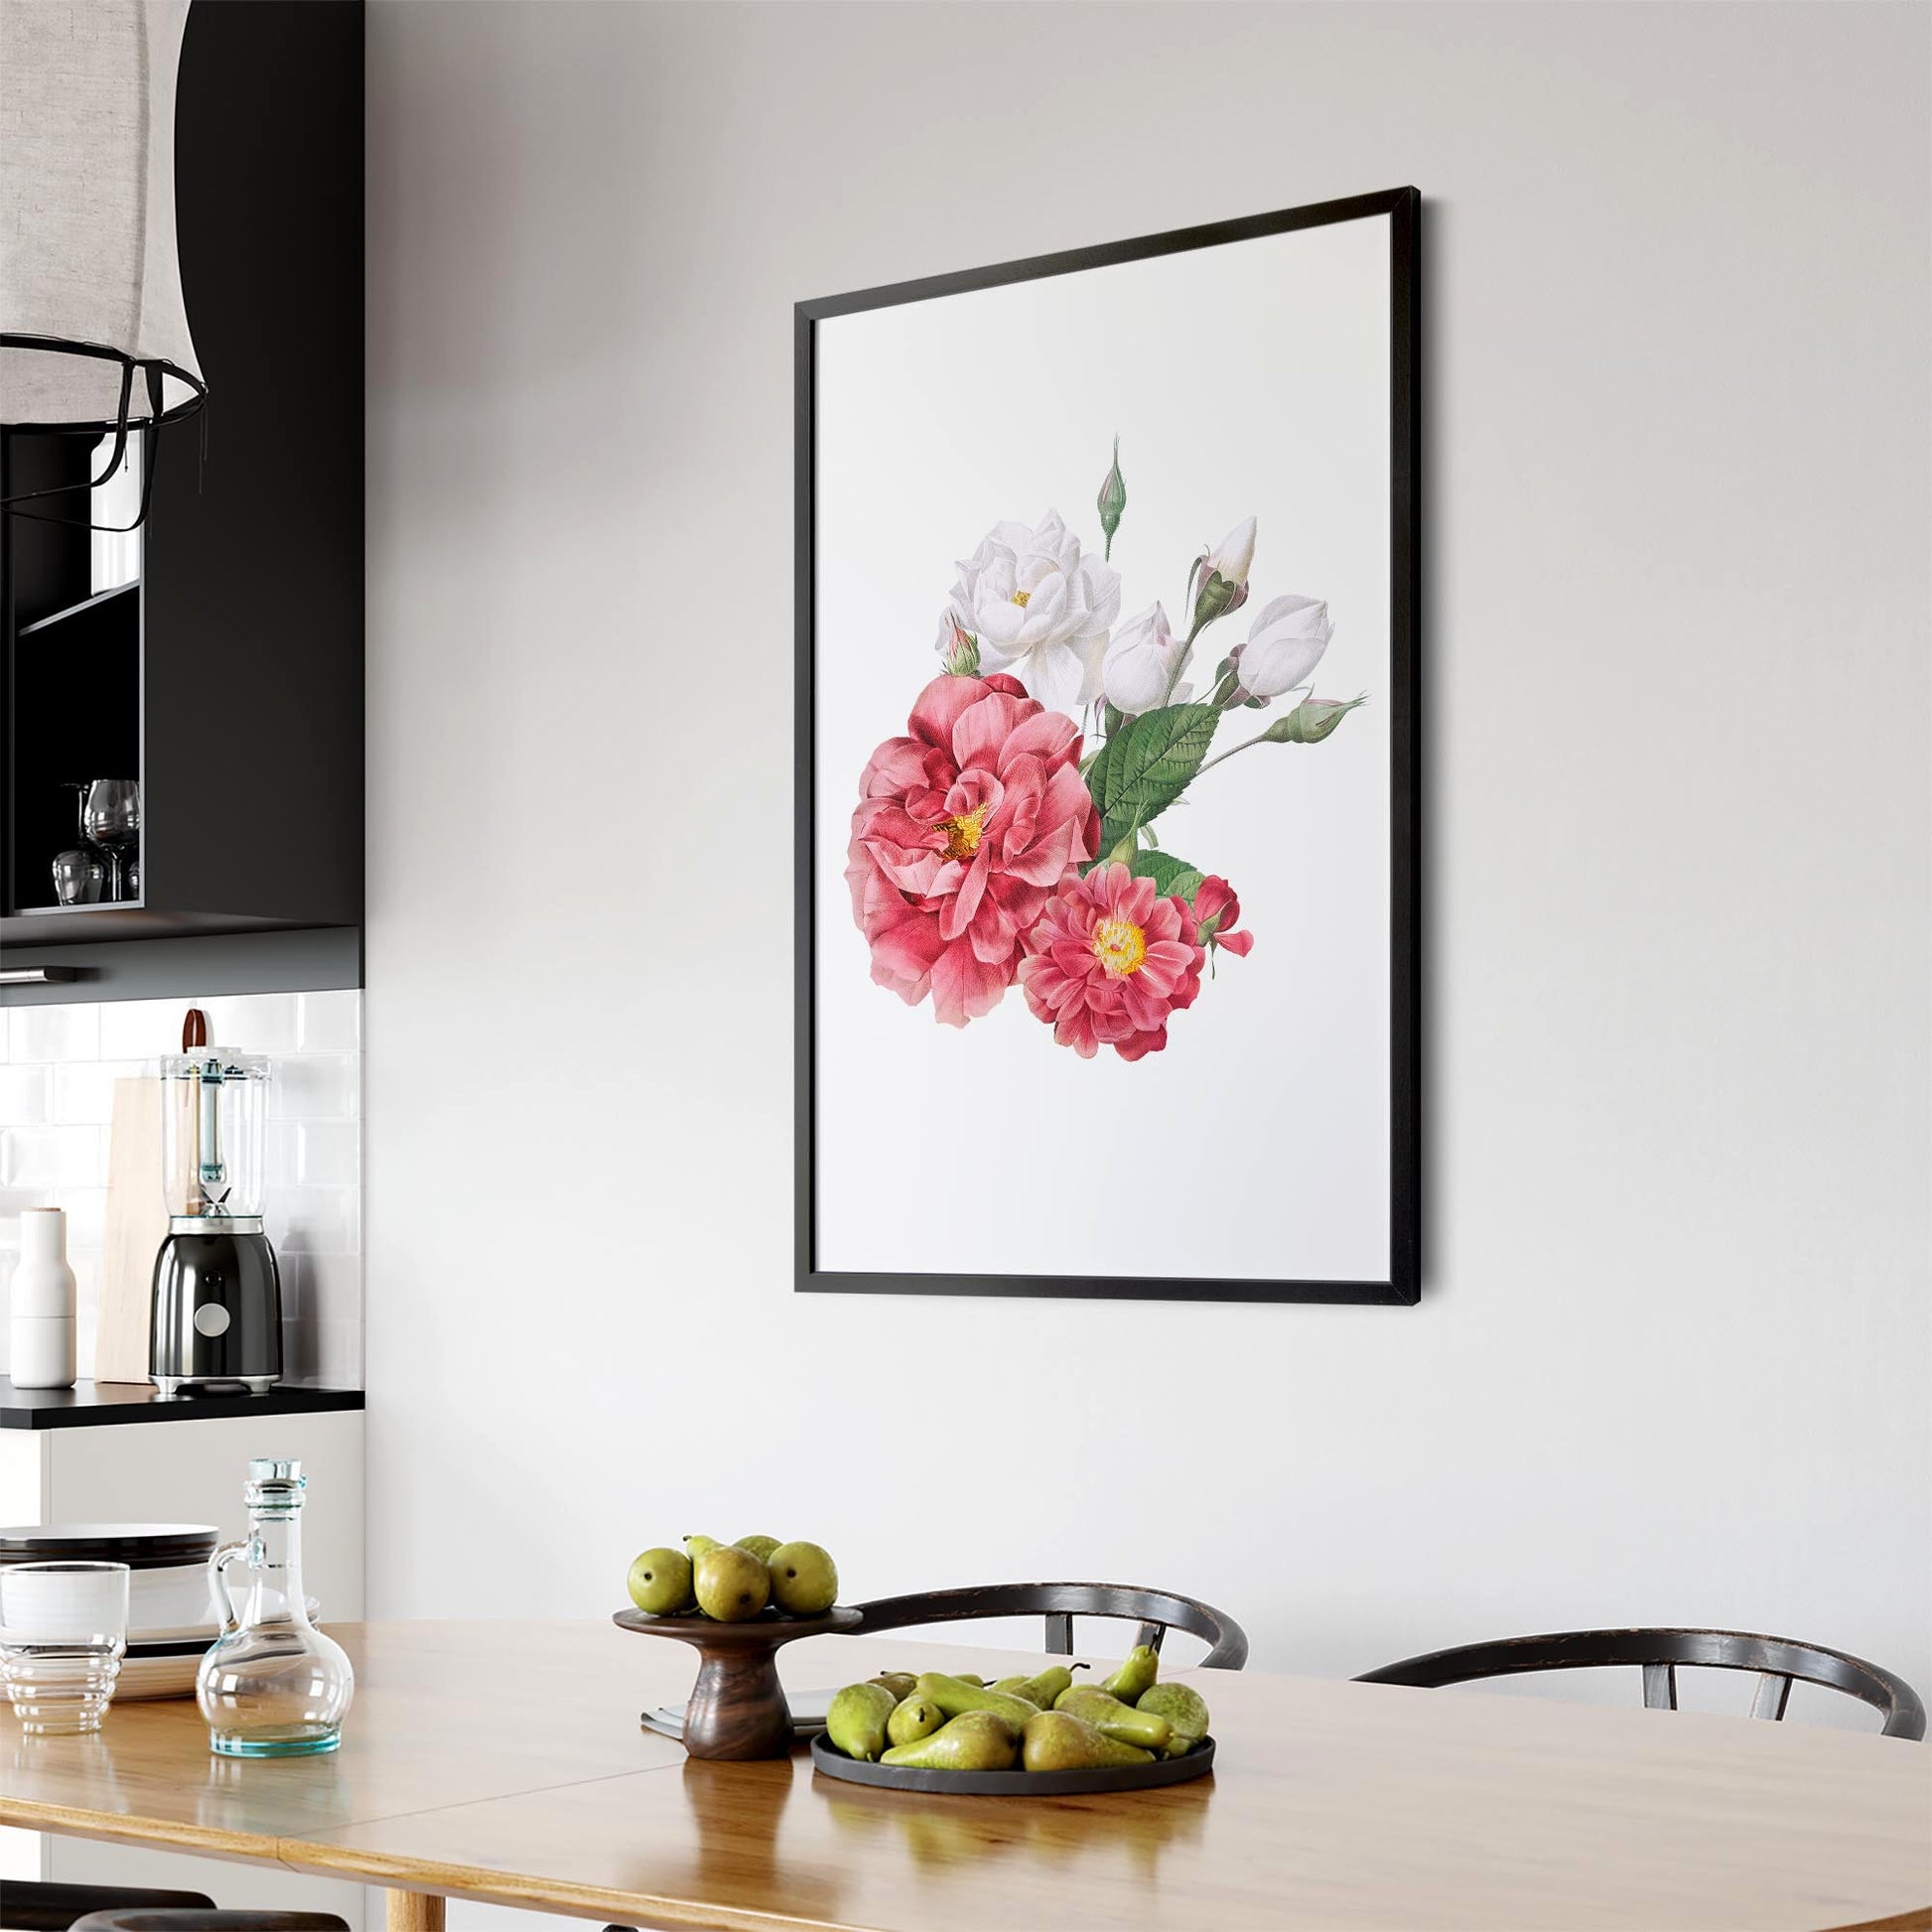 Botanical Flower Painting Floral Kitchen Wall Art #2 - The Affordable Art Company